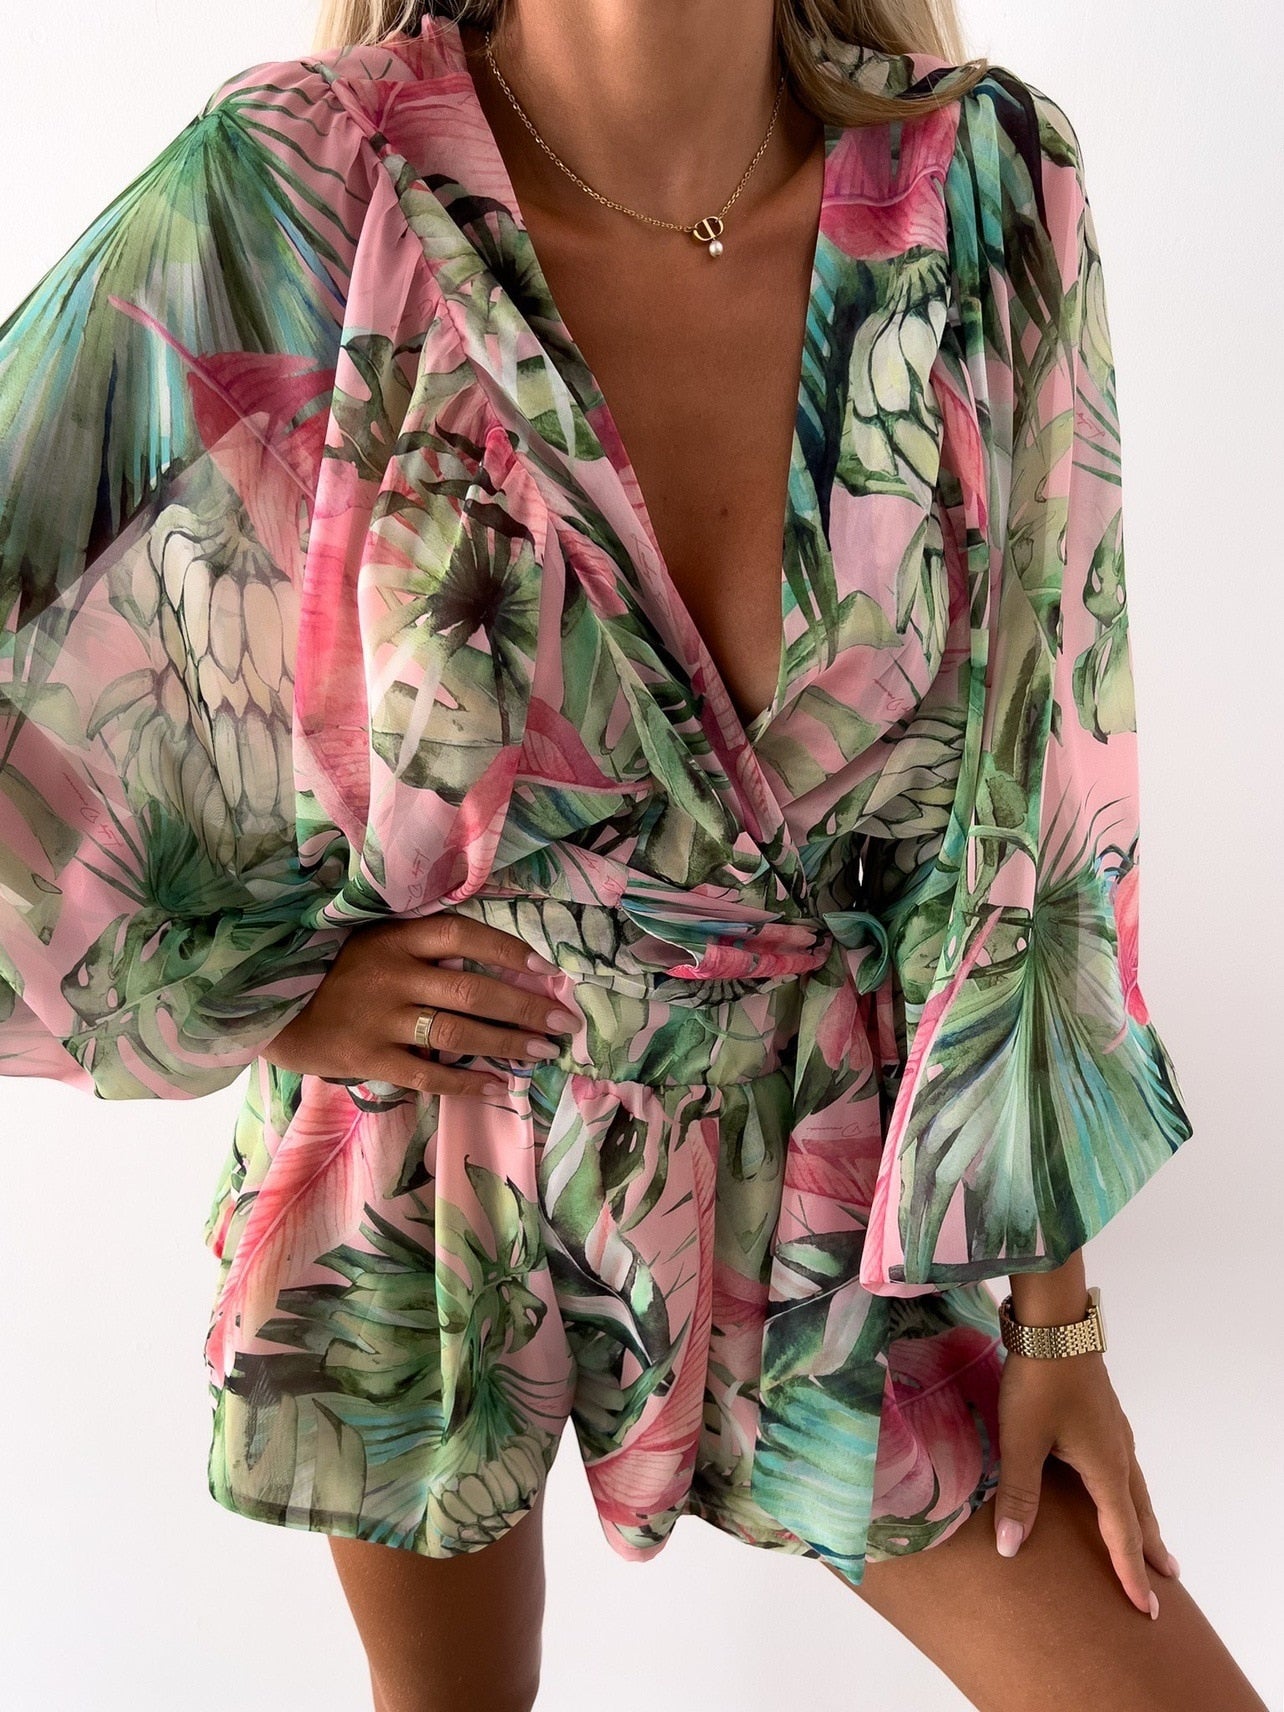 Summer Never Ends Plunge Vacation Romper Playsuit  Sunset and Swim Green S 